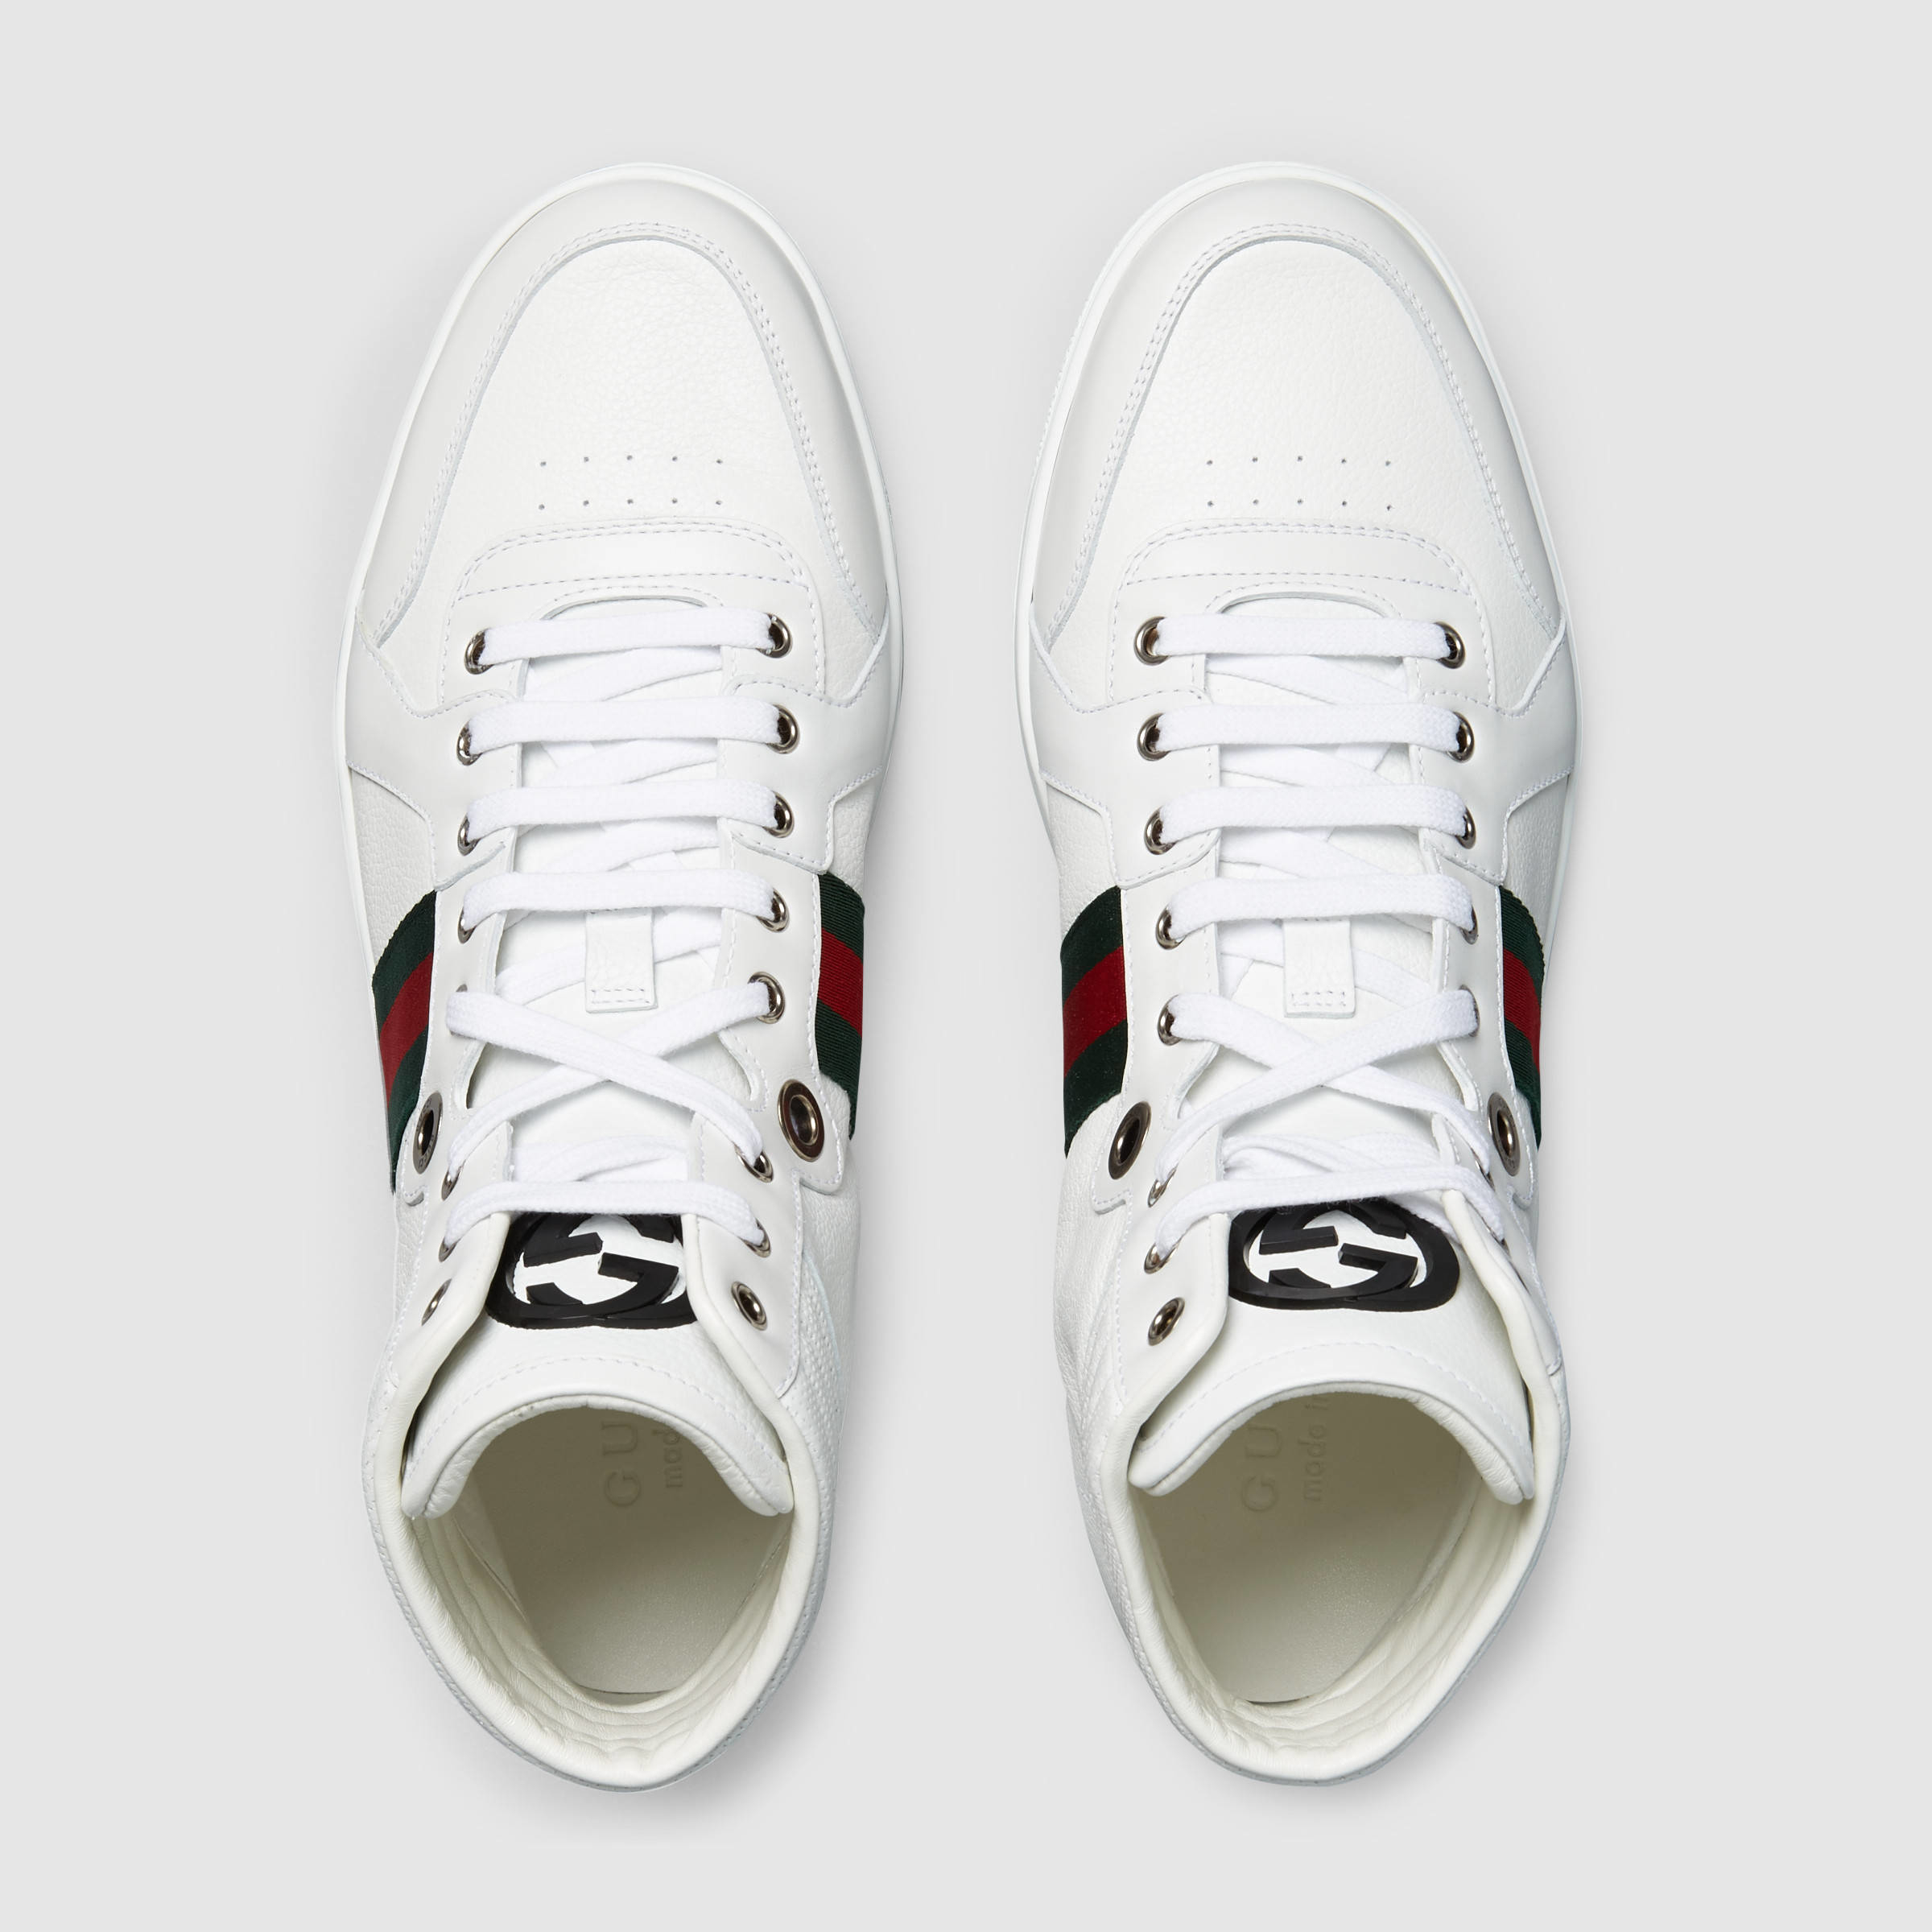 Lyst - Gucci Leather High-top Sneaker in White for Men